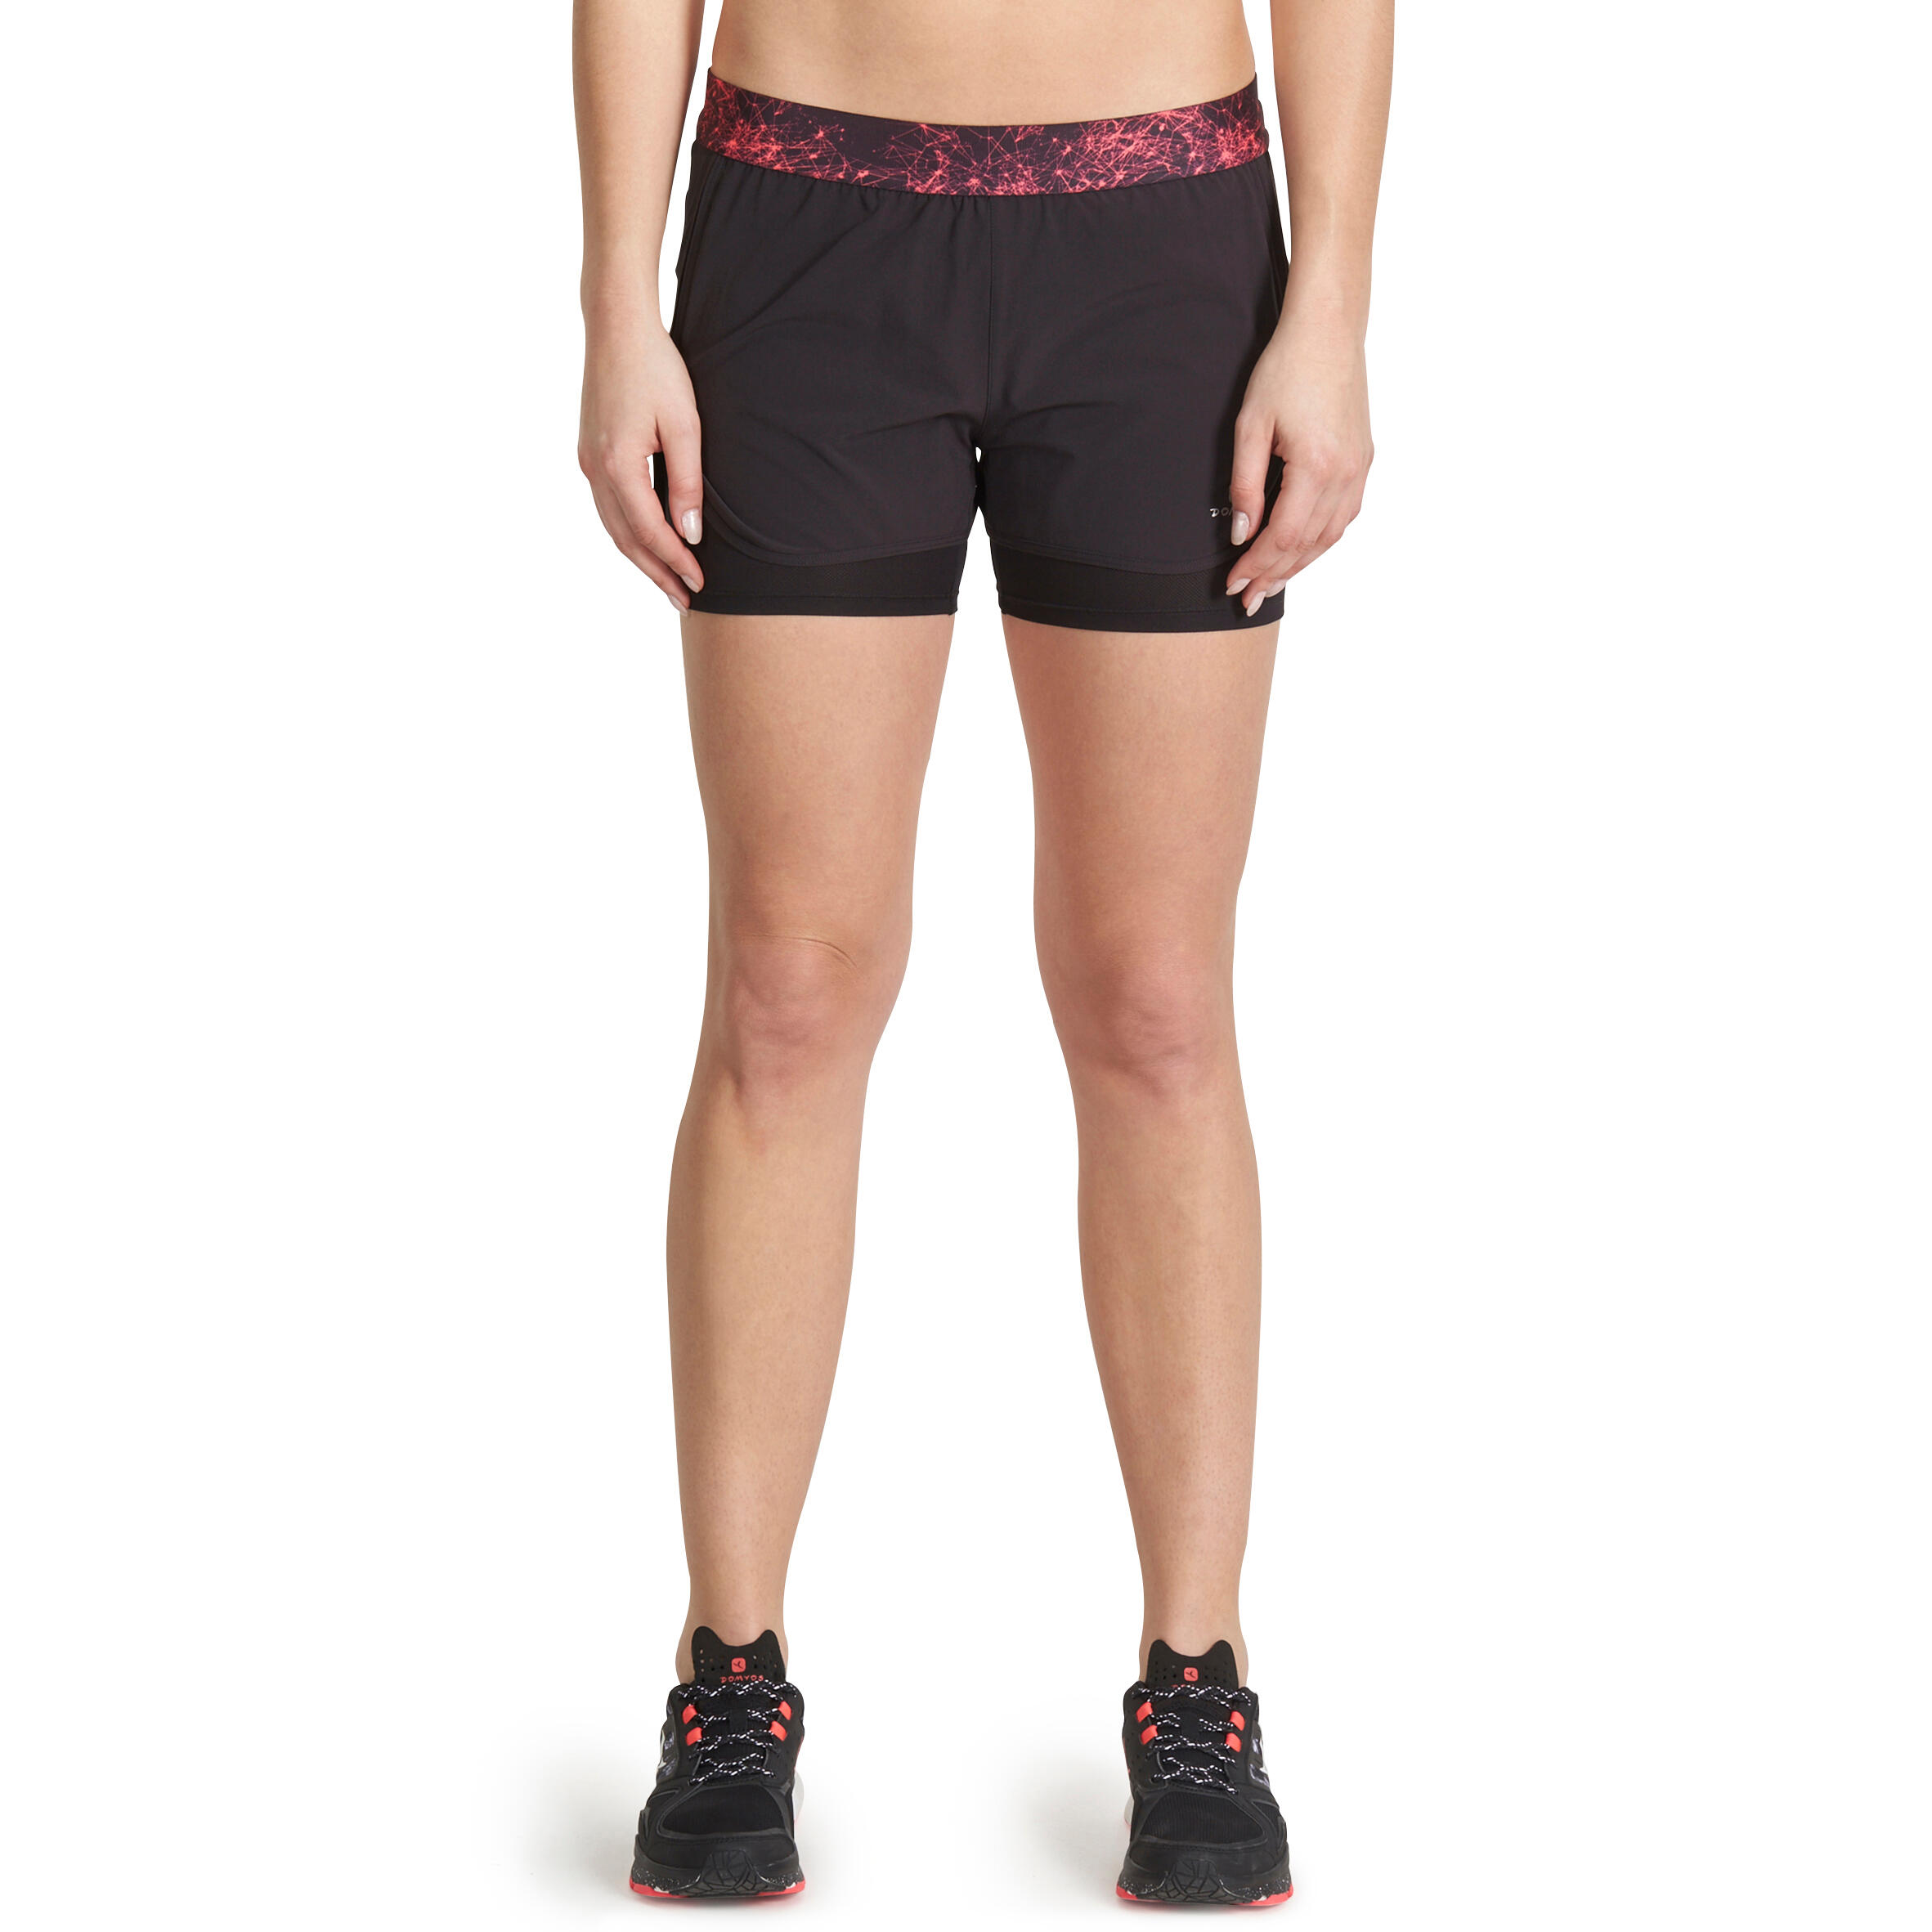 Energy Xtreme Women's 2-in-1 Fitness Shorts - Black/Printed Waistband 2/13